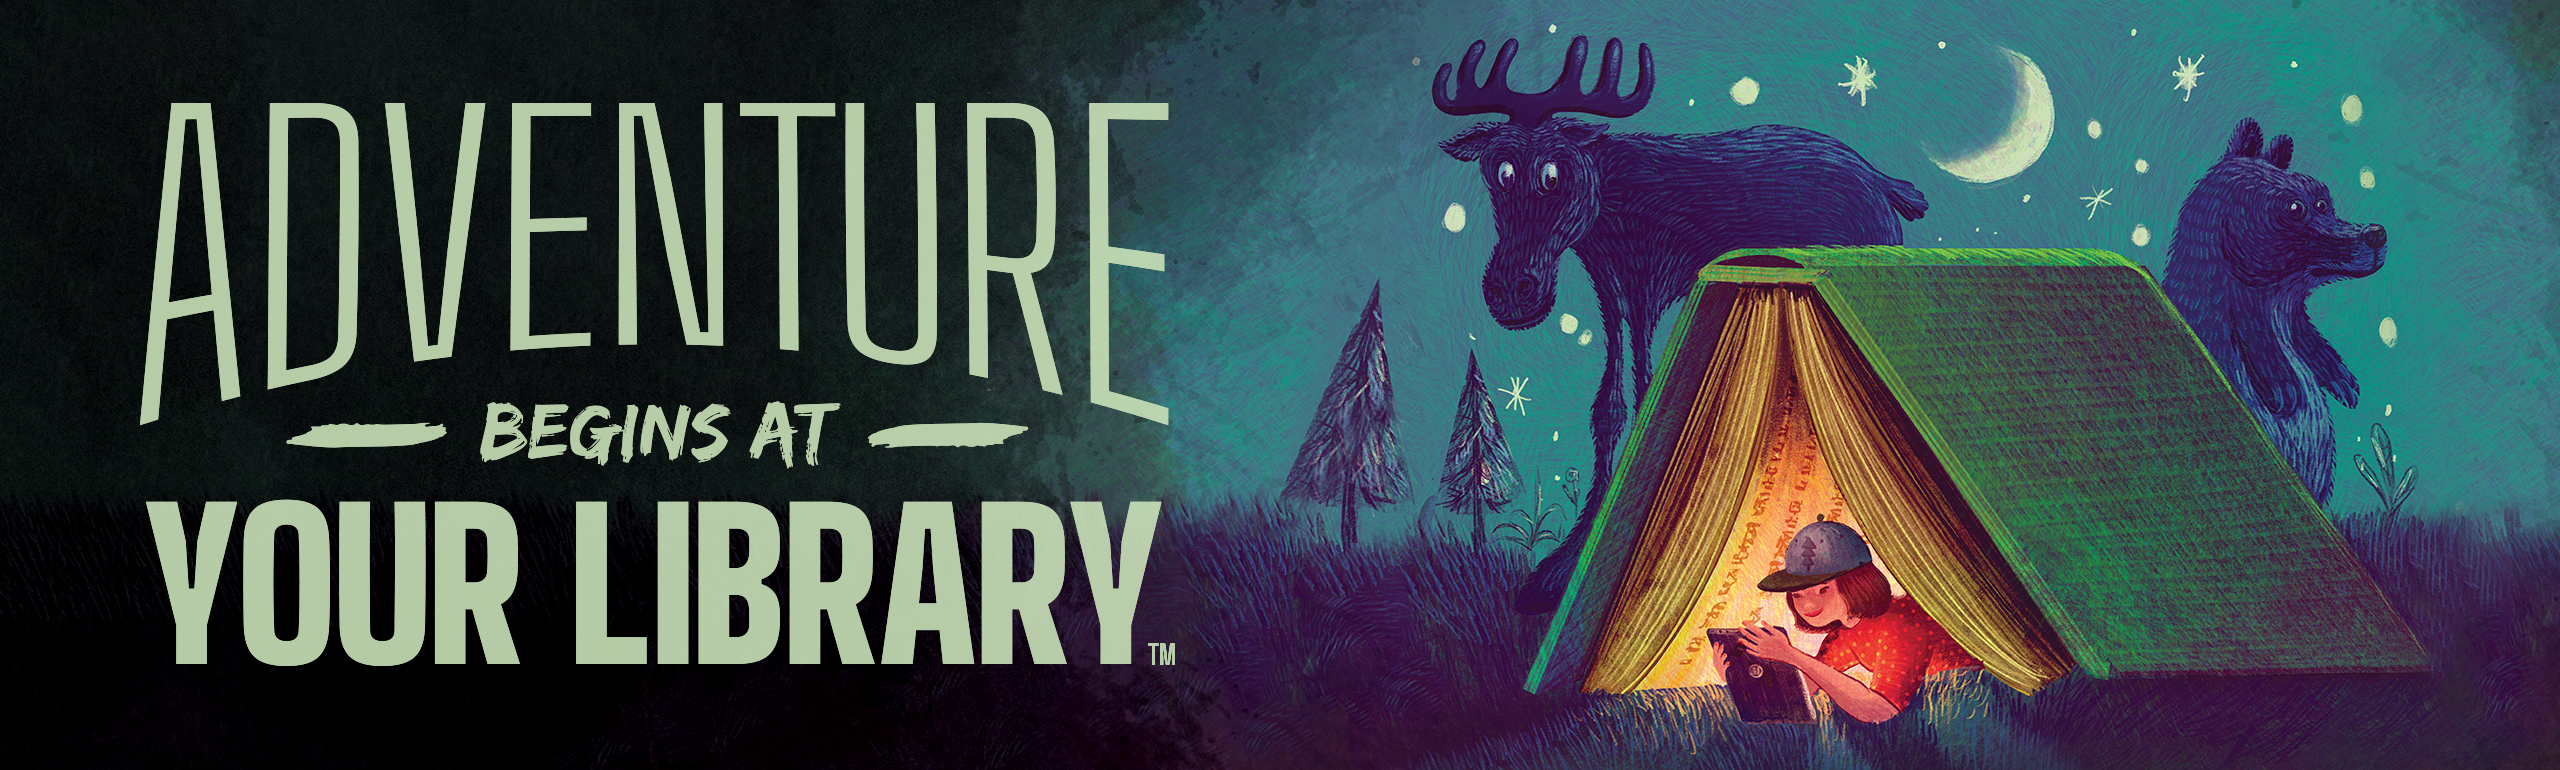 Adventure Begins At Your Library!